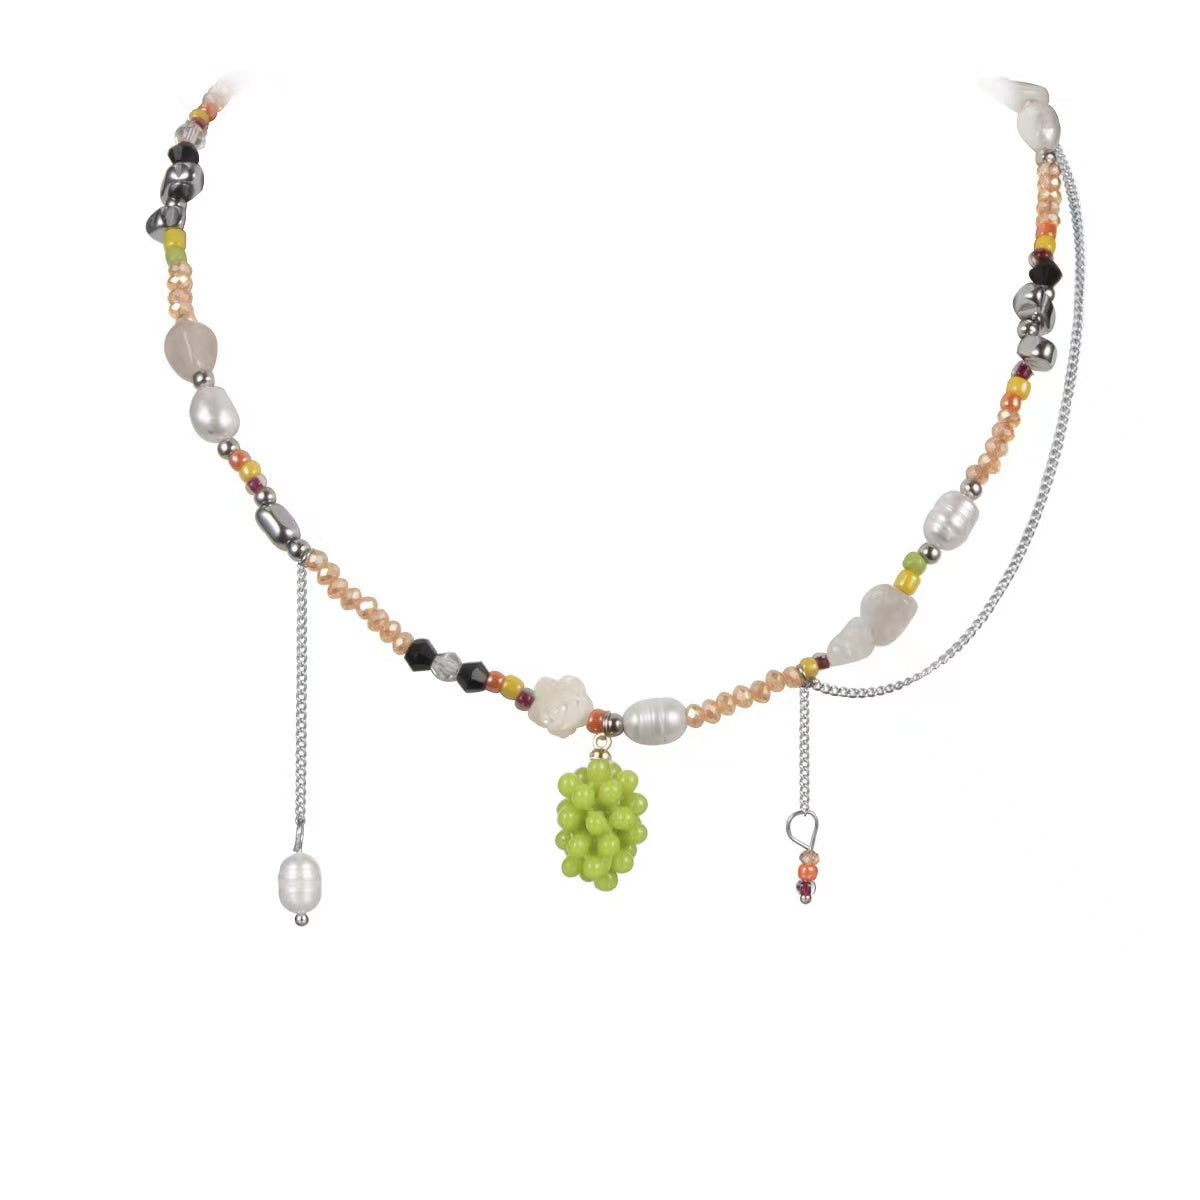 N11 Green Grapes Pendant Colorful Beaded Necklace